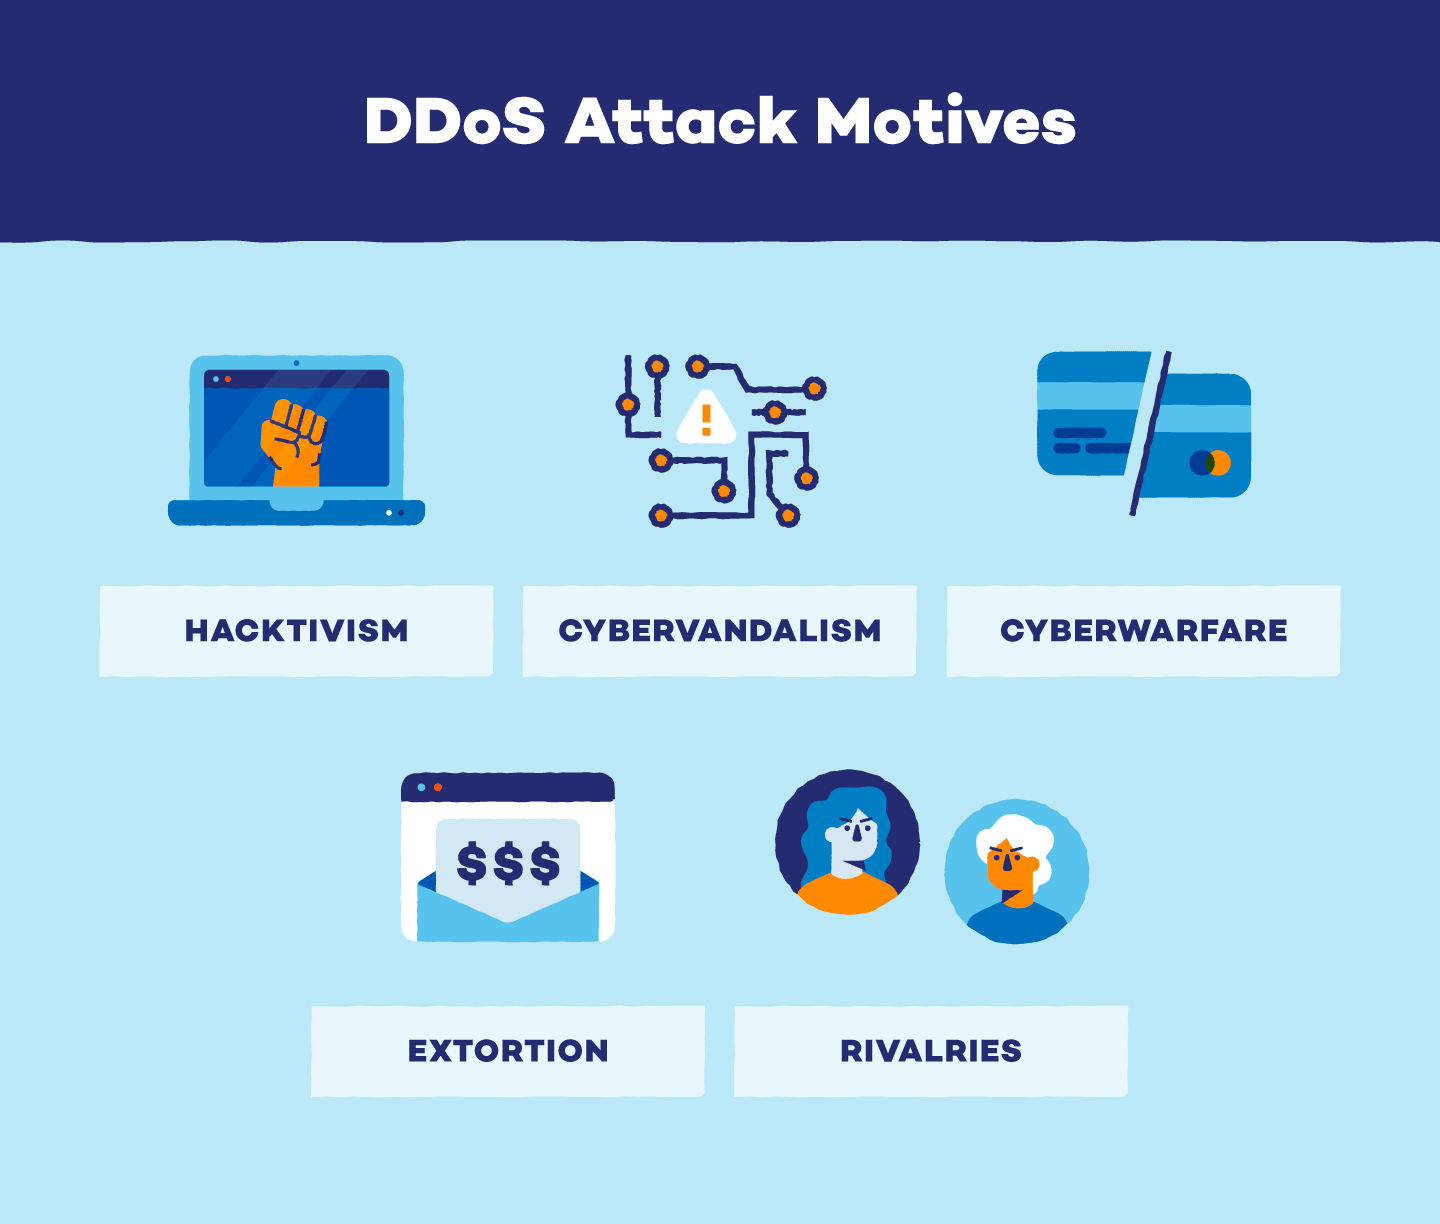 Illustration showing the motives for DDoS attacks, including hacktivism, cybervandalism, cyberwarfare, extortion, and rivalries.